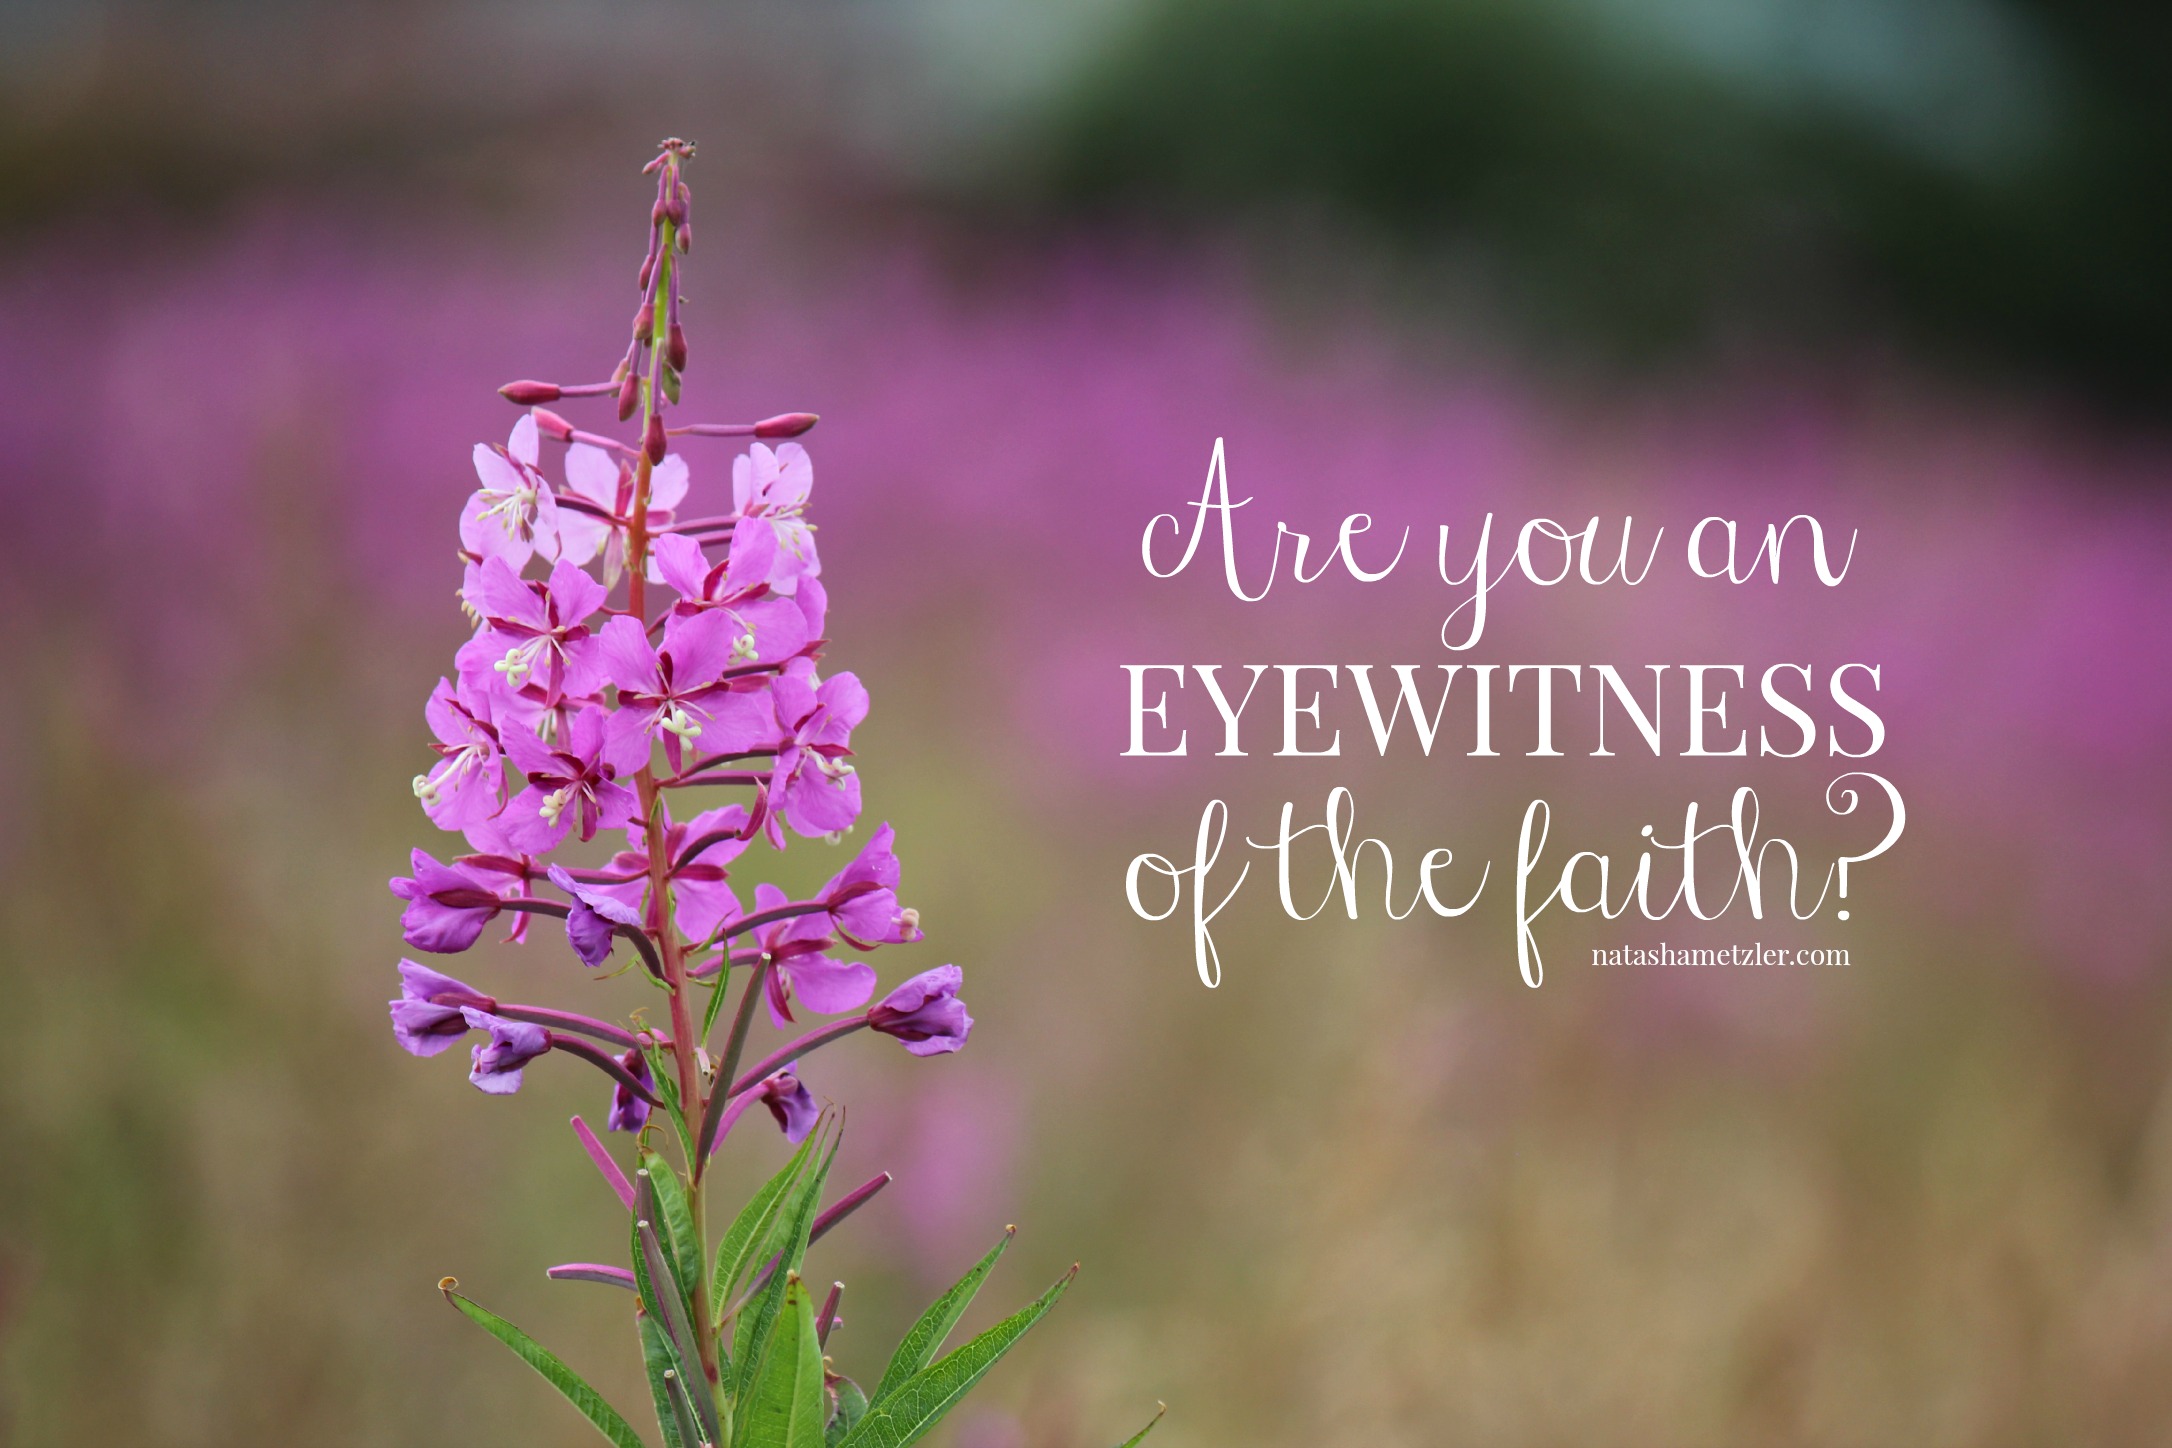 Are you an eyewitness of the faith